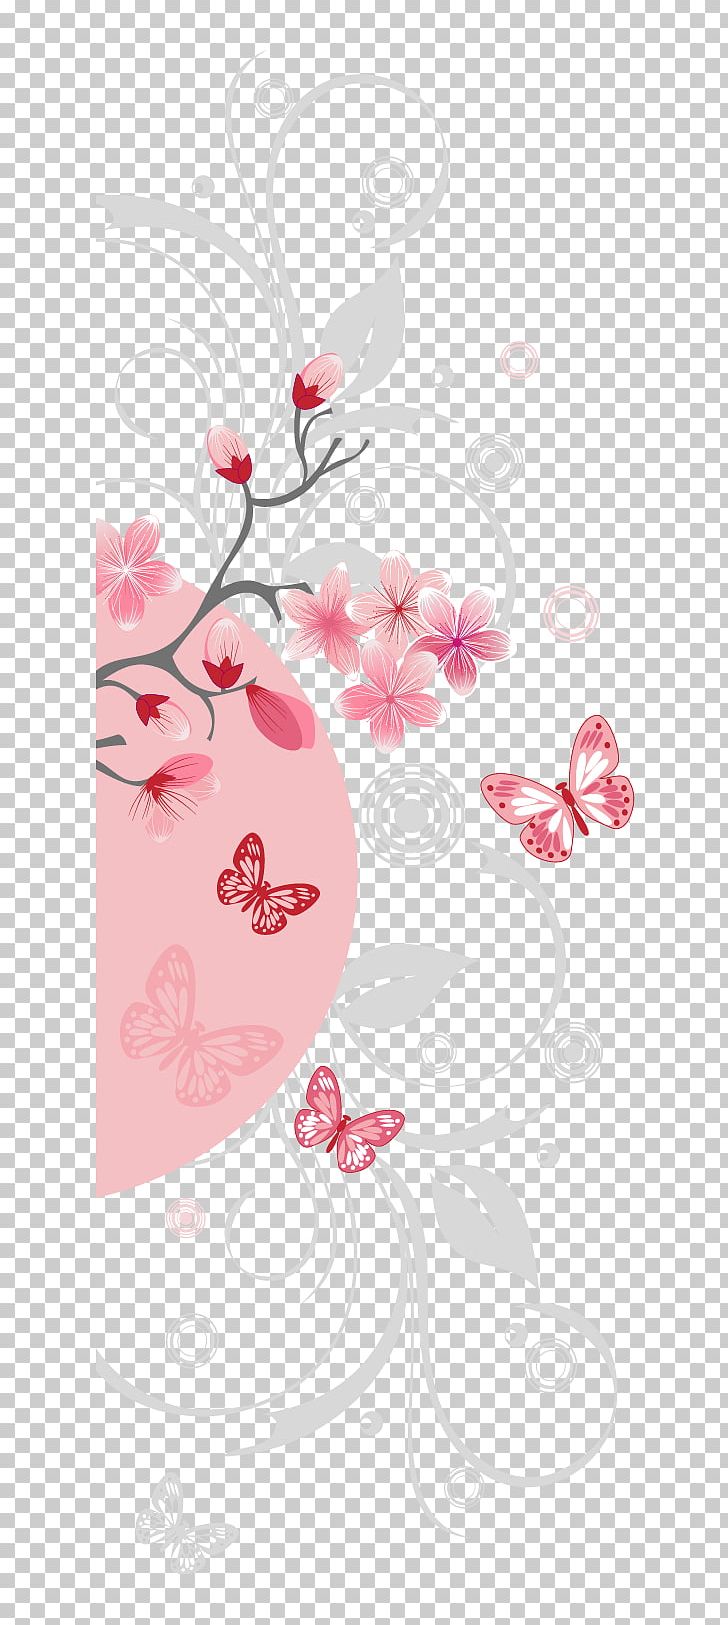 National Cherry Blossom Festival PNG, Clipart, Border, Branch, Cherry, Encapsulated Postscript, Flower Free PNG Download